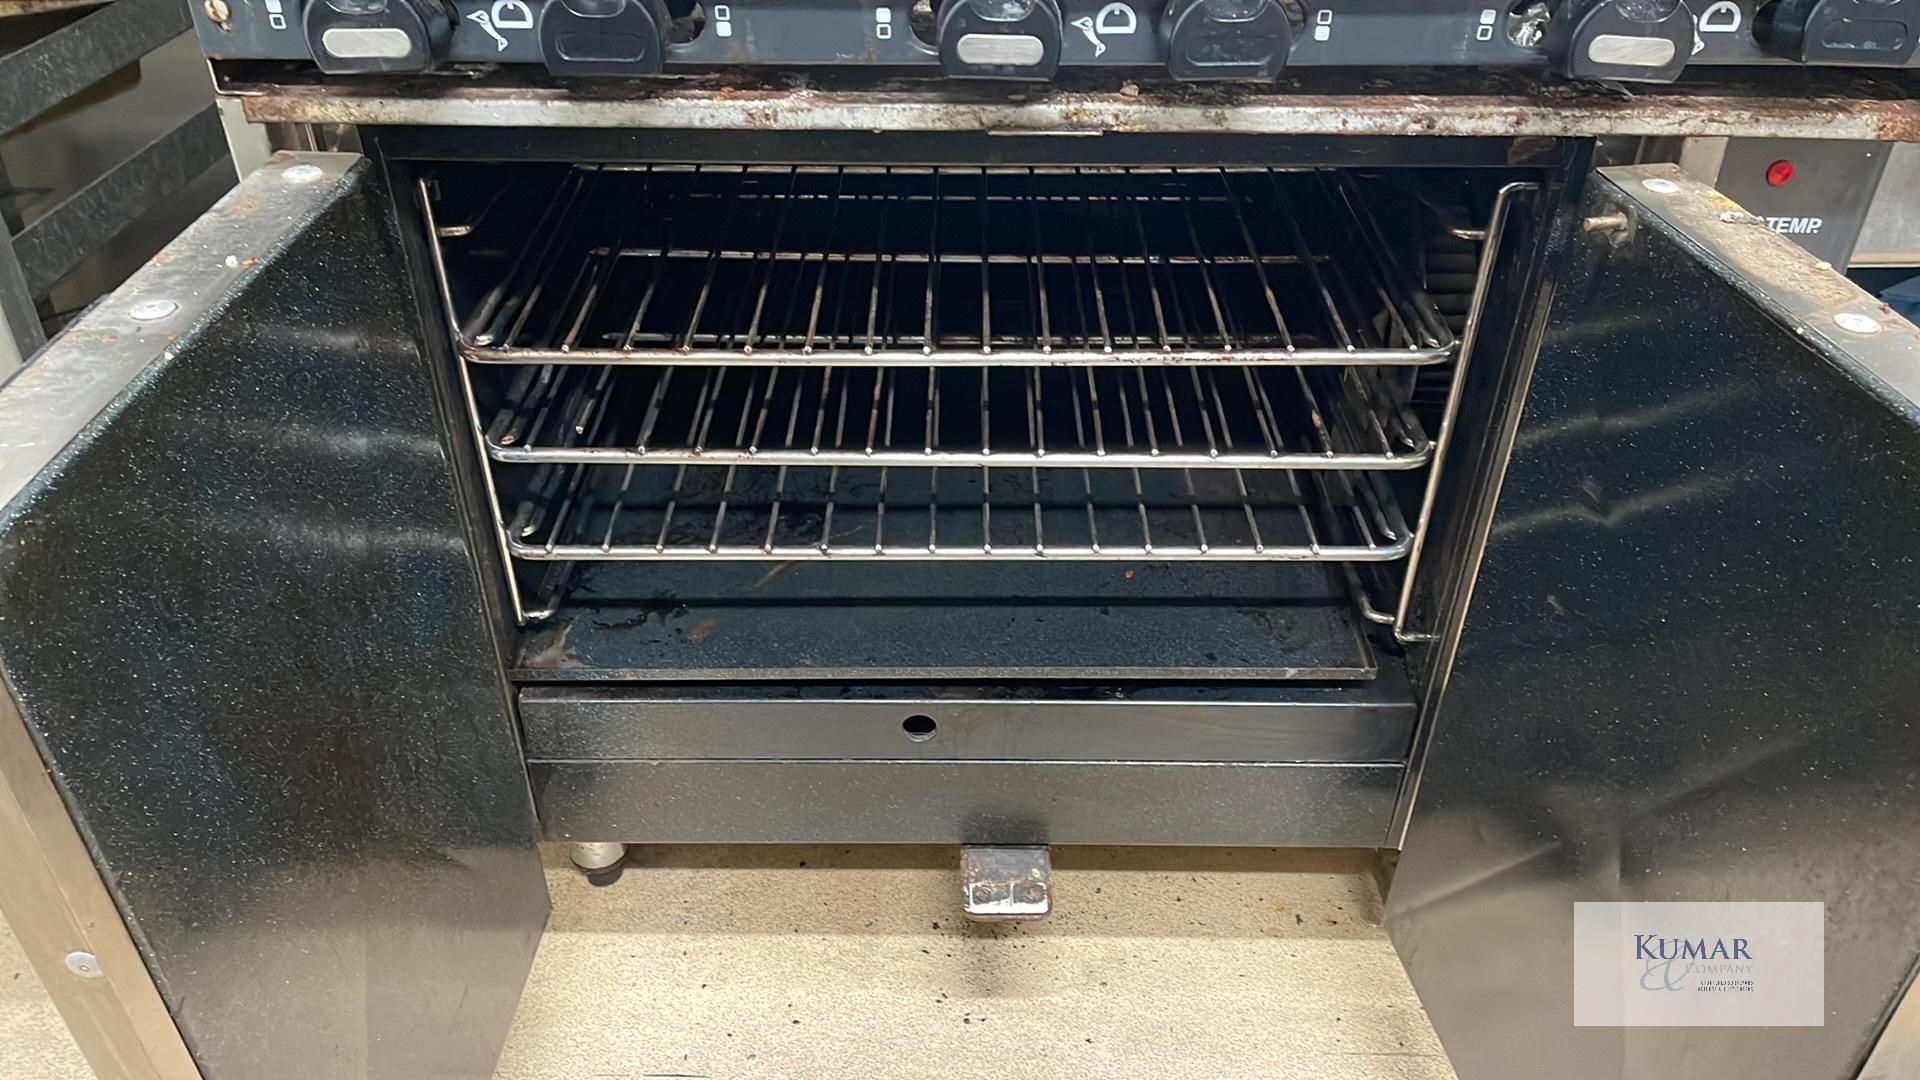 Blue Seal Turbofan 6 Burner Gas Range Cooker with Large Oven - Will Require Electrical - Image 6 of 7